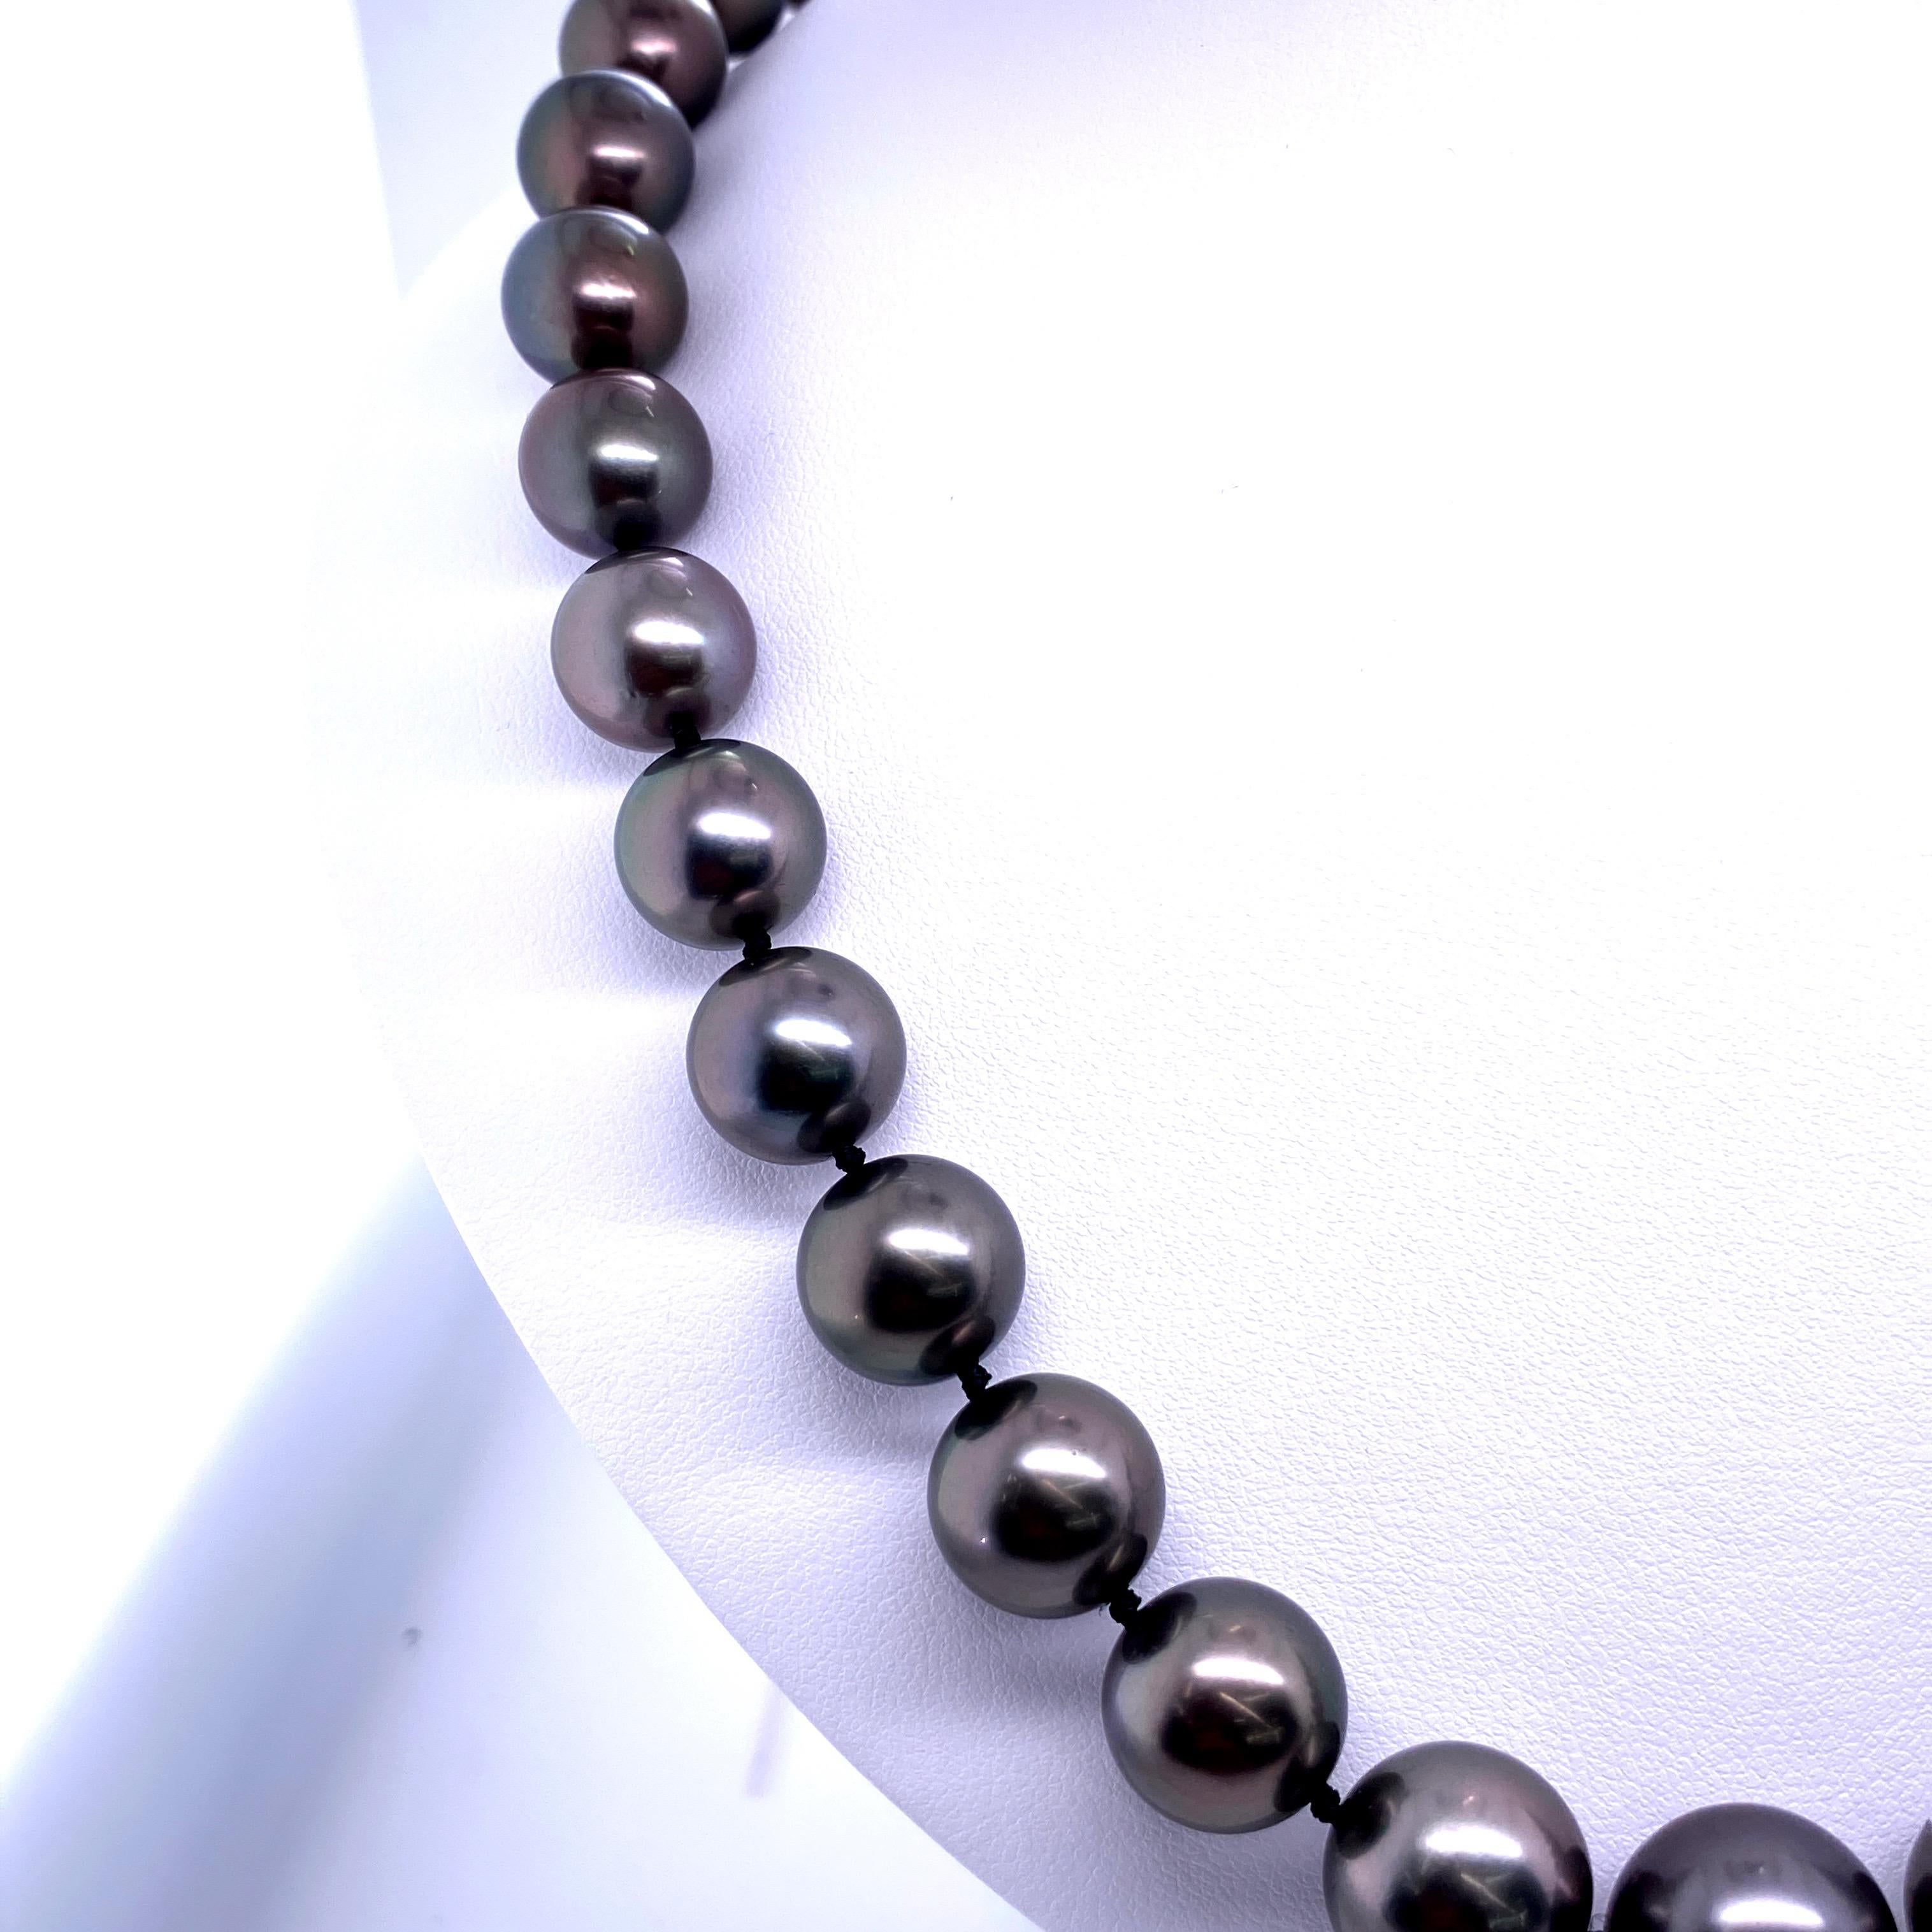 Perfectly matched strain of 37 round Tahitian grey pearls measuring 10.7-13.3 MM with a 14k white gold high polish ball clasp. 

Pearl quality: AAA
Pearl Luster: AAA Excellent
Nacre : Very Thick

Strand can be made to order, shortened or longer.